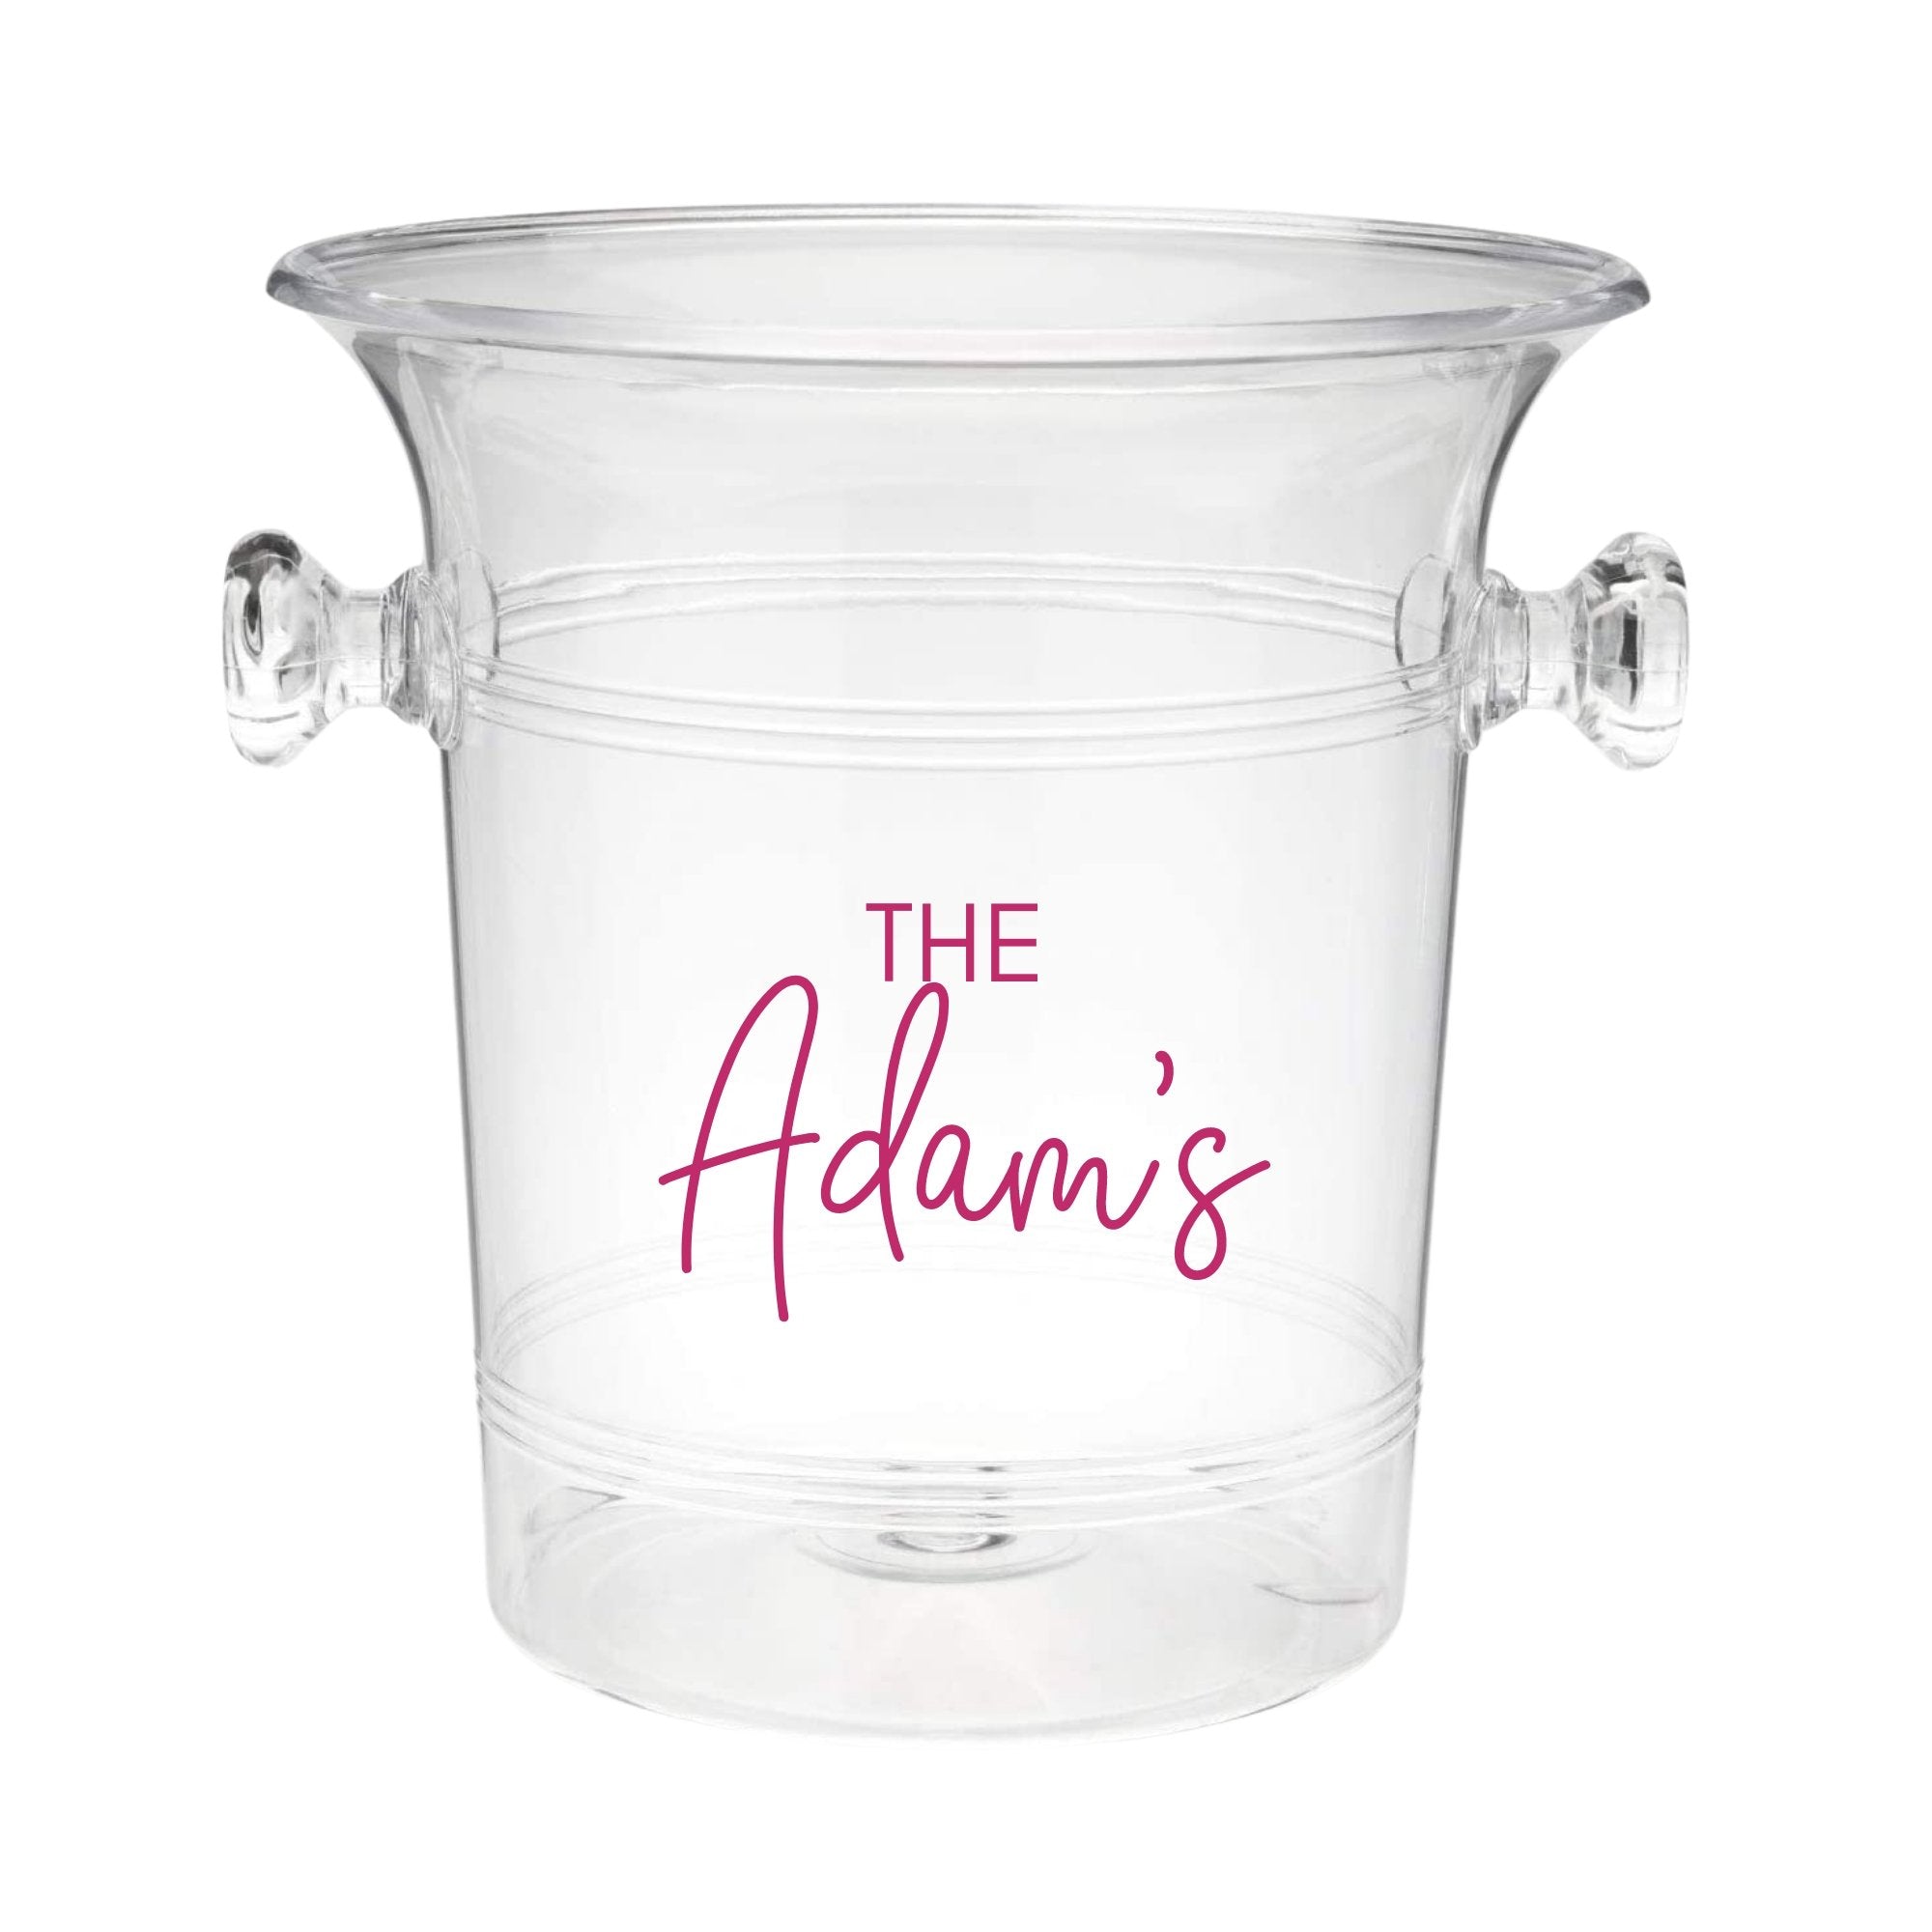 A clear ice bucket with "The Berkshires" on the front